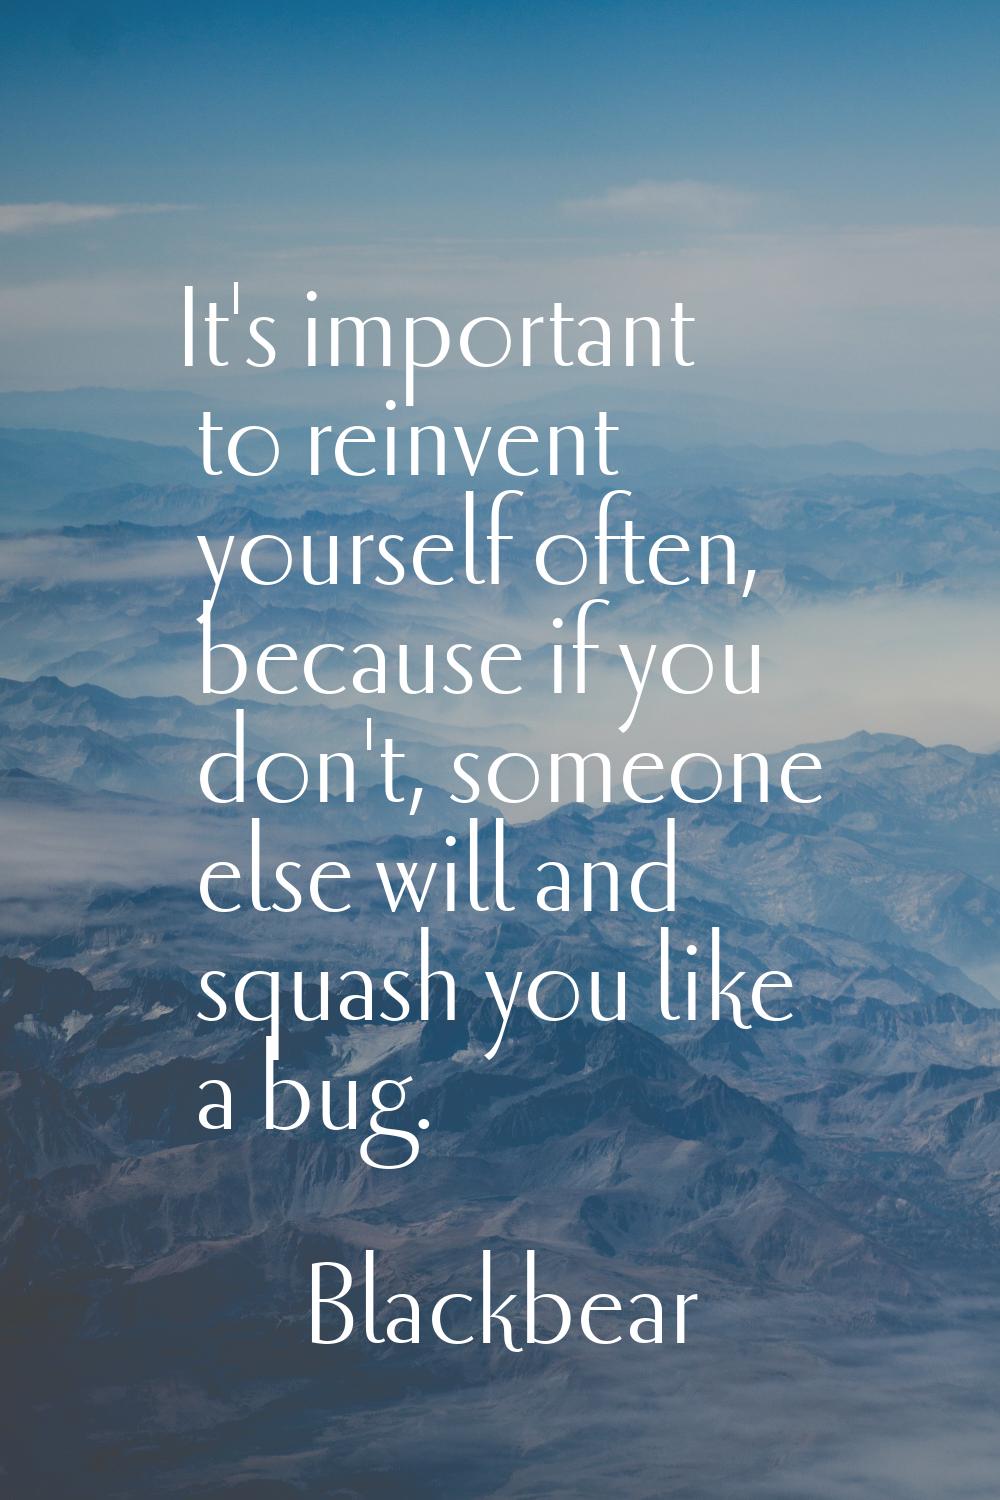 It's important to reinvent yourself often, because if you don't, someone else will and squash you l